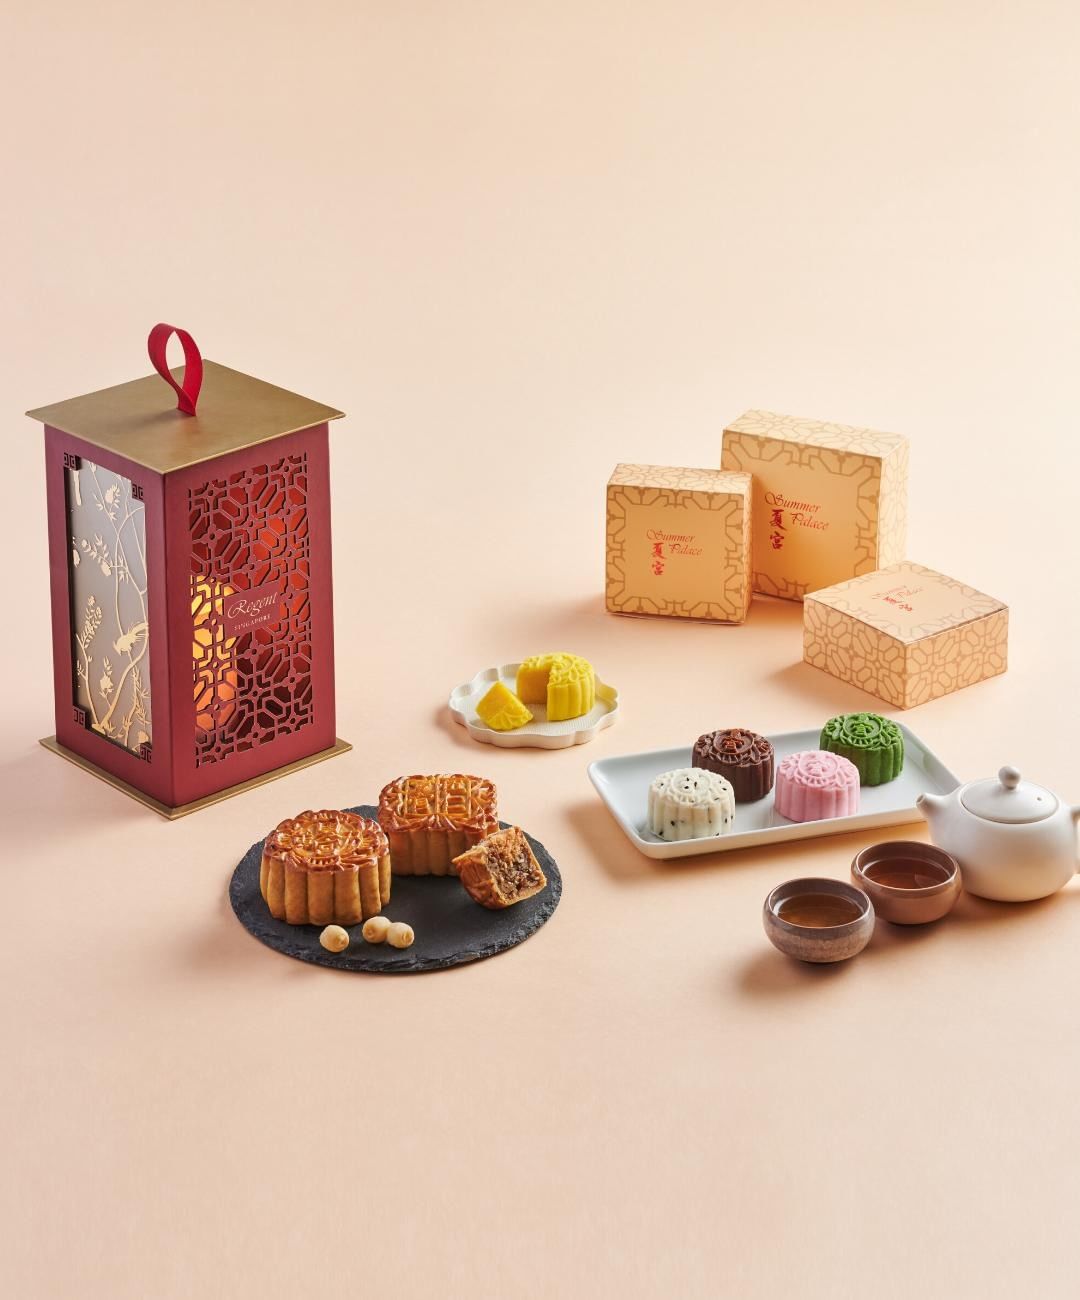 Regent’s mooncakes are carefully packed in a gold-laced red box that doubles up as a lantern